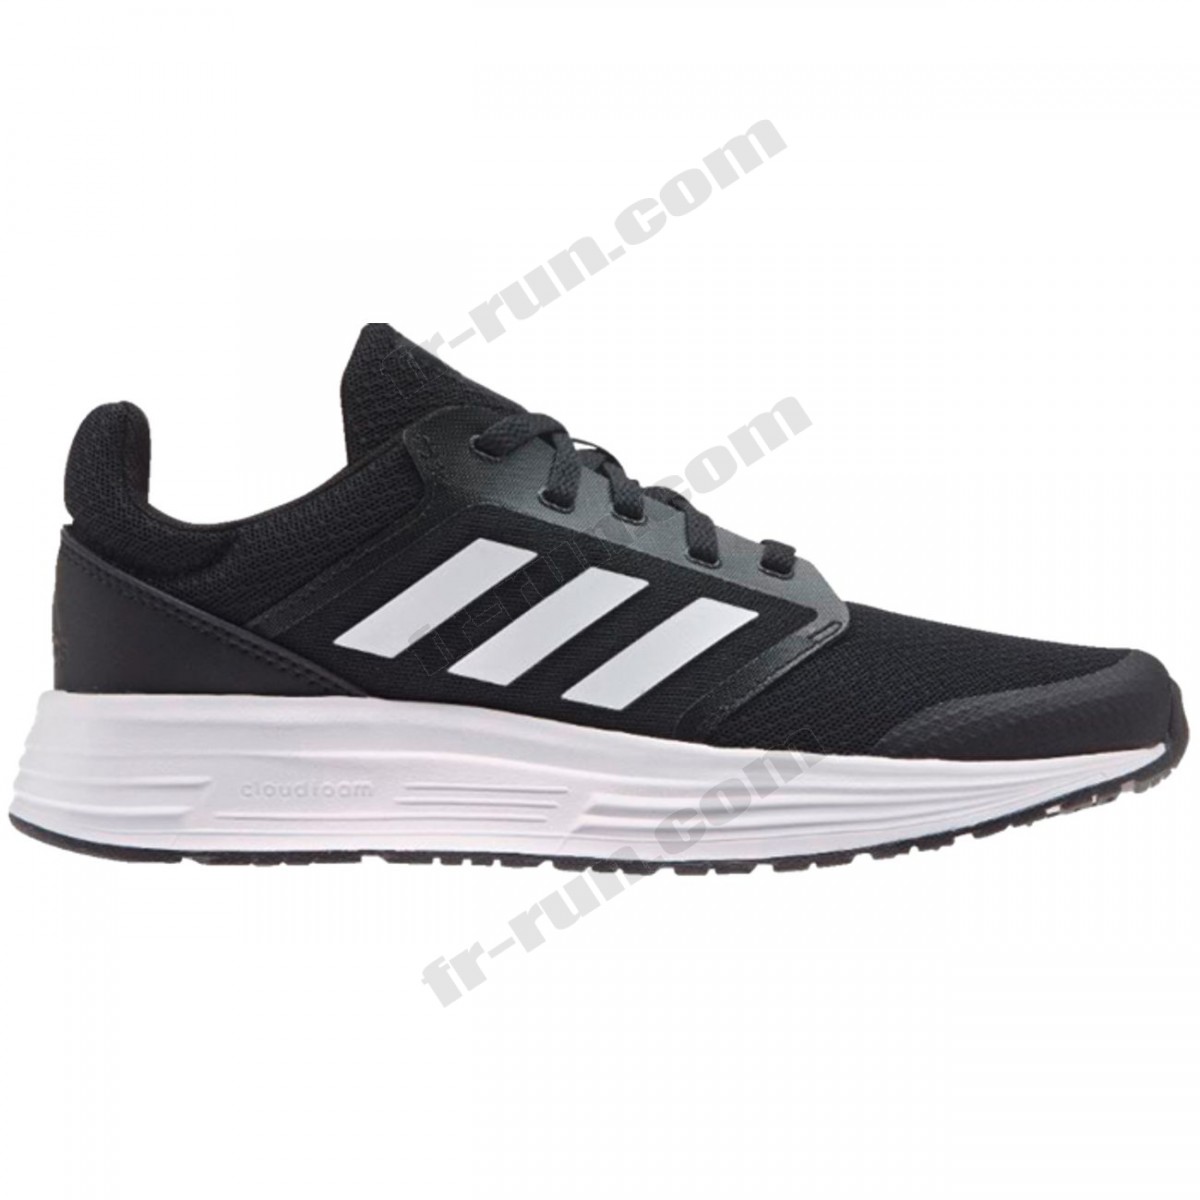 Adidas/CHAUSSURES BASSES running homme ADIDAS GALAXY 5 M √ Nouveau style √ Soldes - Adidas/CHAUSSURES BASSES running homme ADIDAS GALAXY 5 M √ Nouveau style √ Soldes